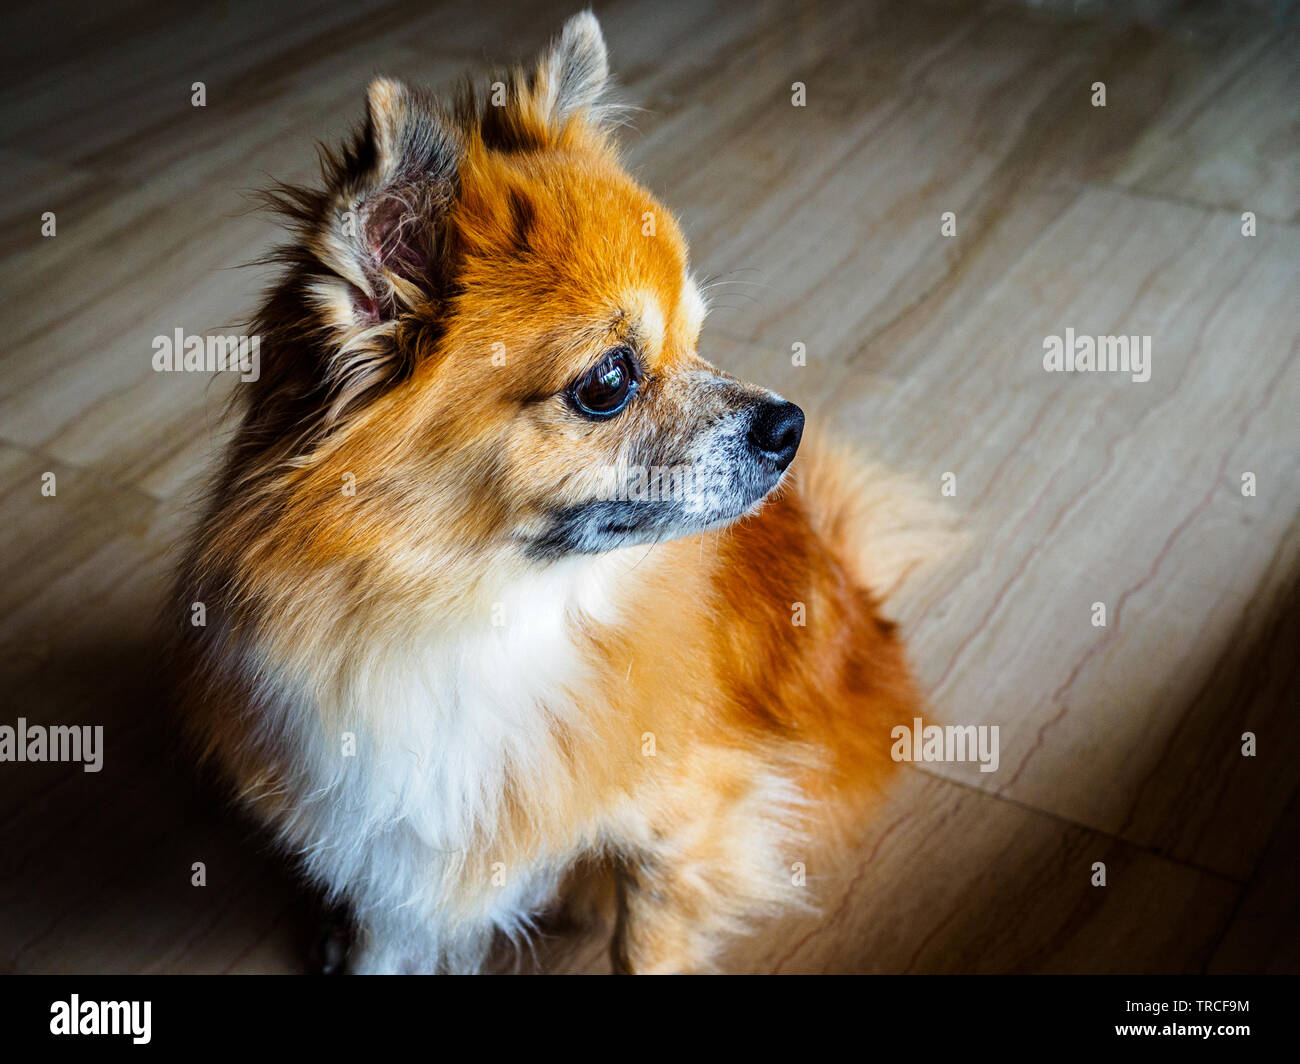 Small senior mixed breed dog of Pomeranian and chihuahua stock stares into the distance with a pensive expression Stock Photo